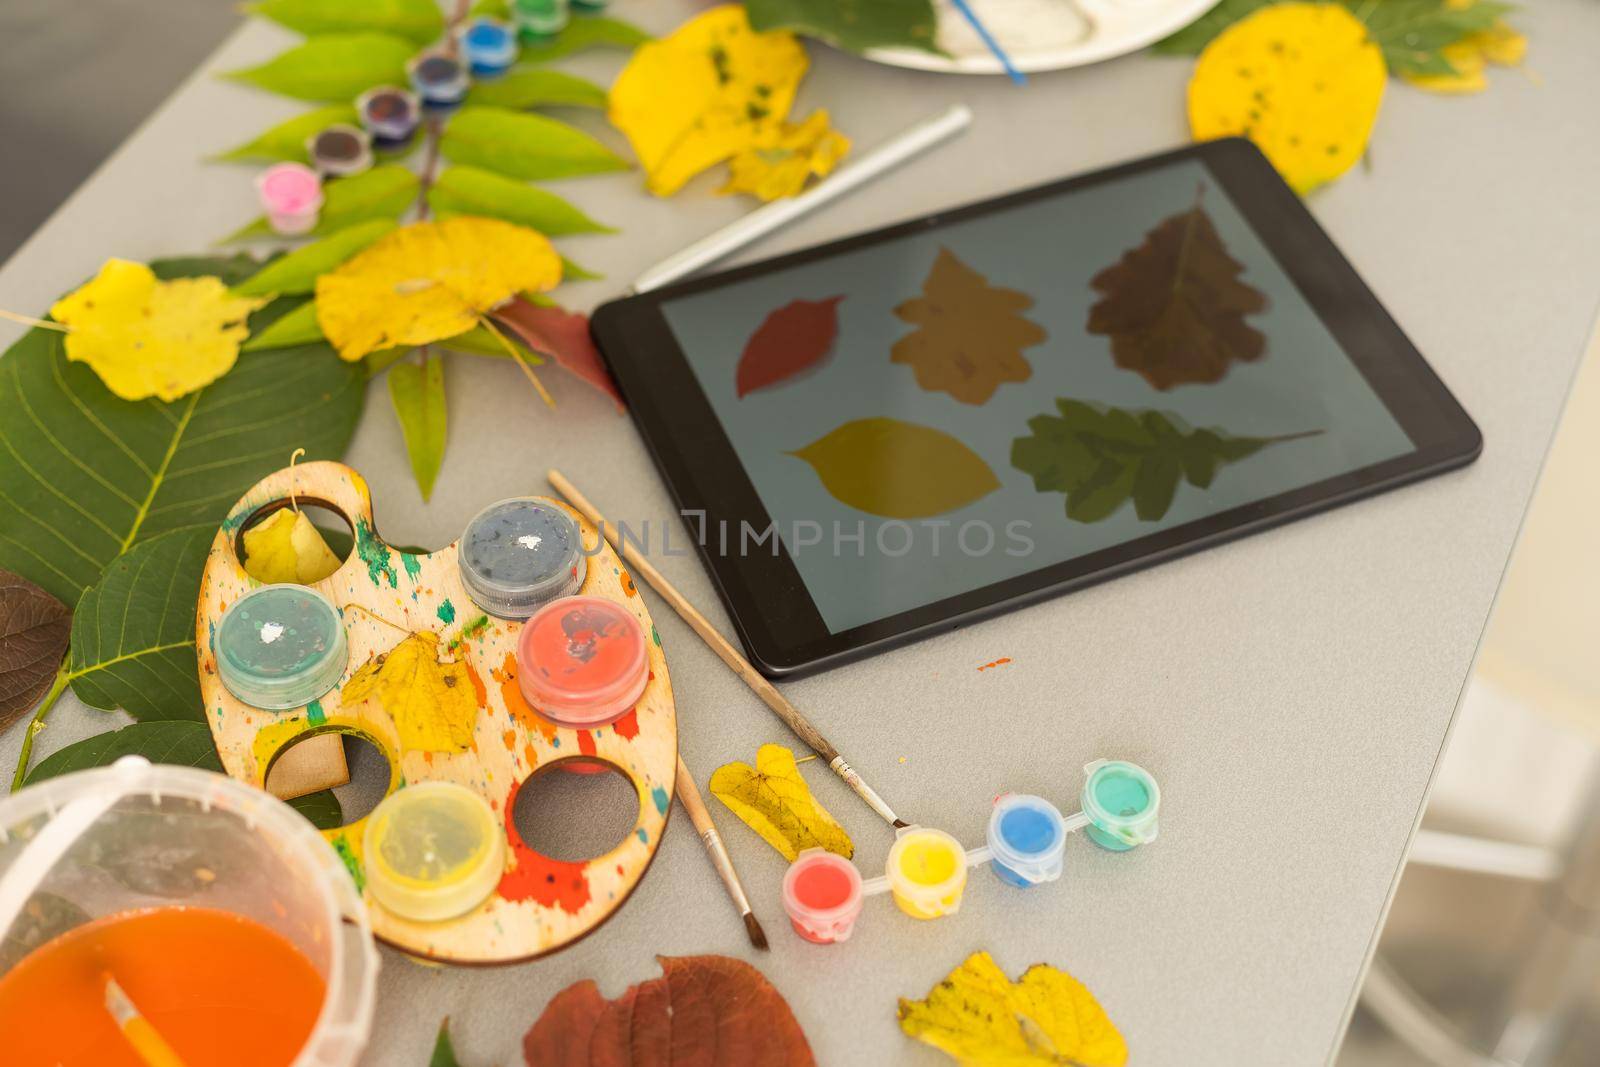 Tablet hot tea checkered blanket apples and autumn leaves on old wooden background Vintage tonning Autumn concept mock up by Andelov13